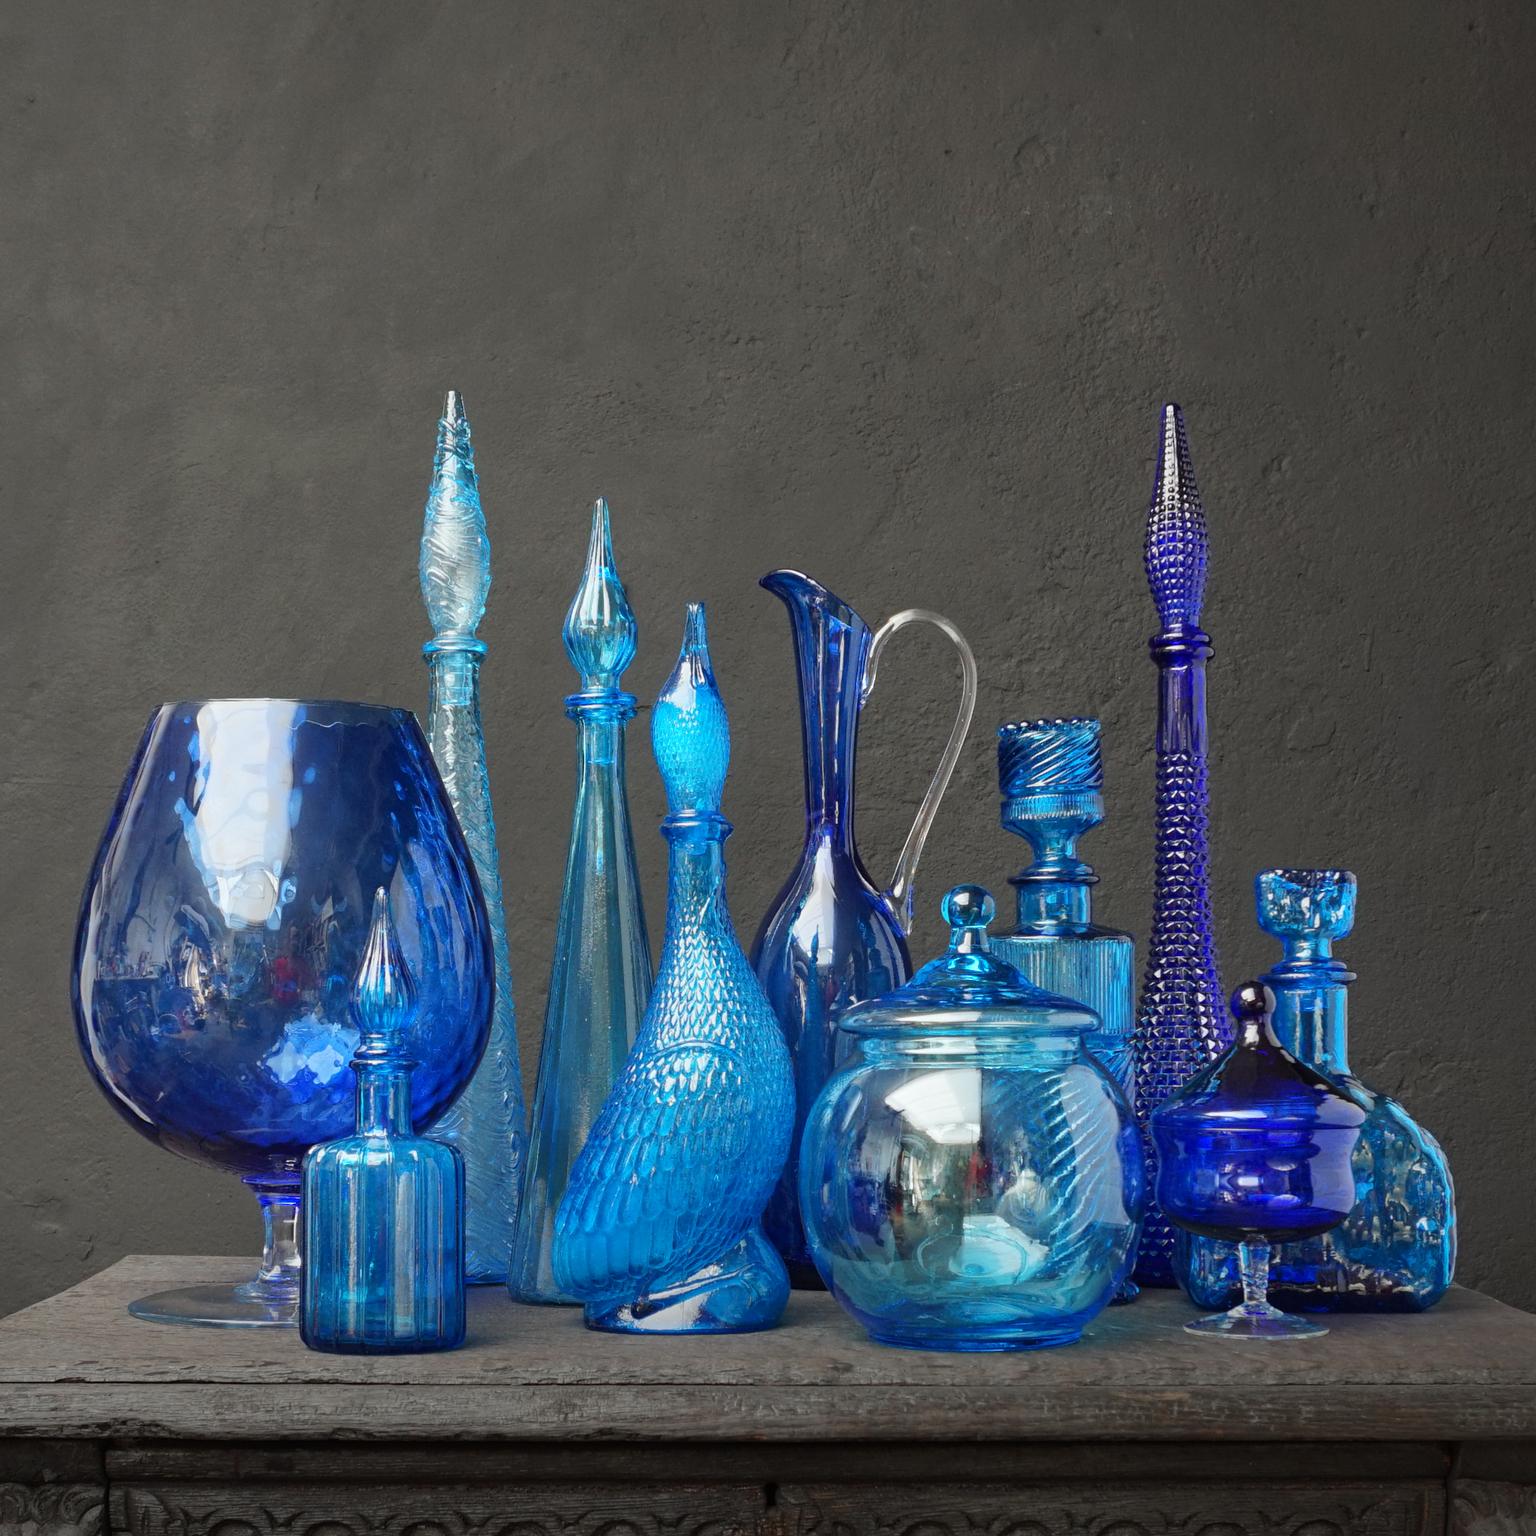 Very decorative blue set of eleven different size Italian blown and pressed glass bottles.
Five genie bottles, a pressed Brutalist decanter and blown clear and blue glass bonbon or candy jars in different shapes and different shades of